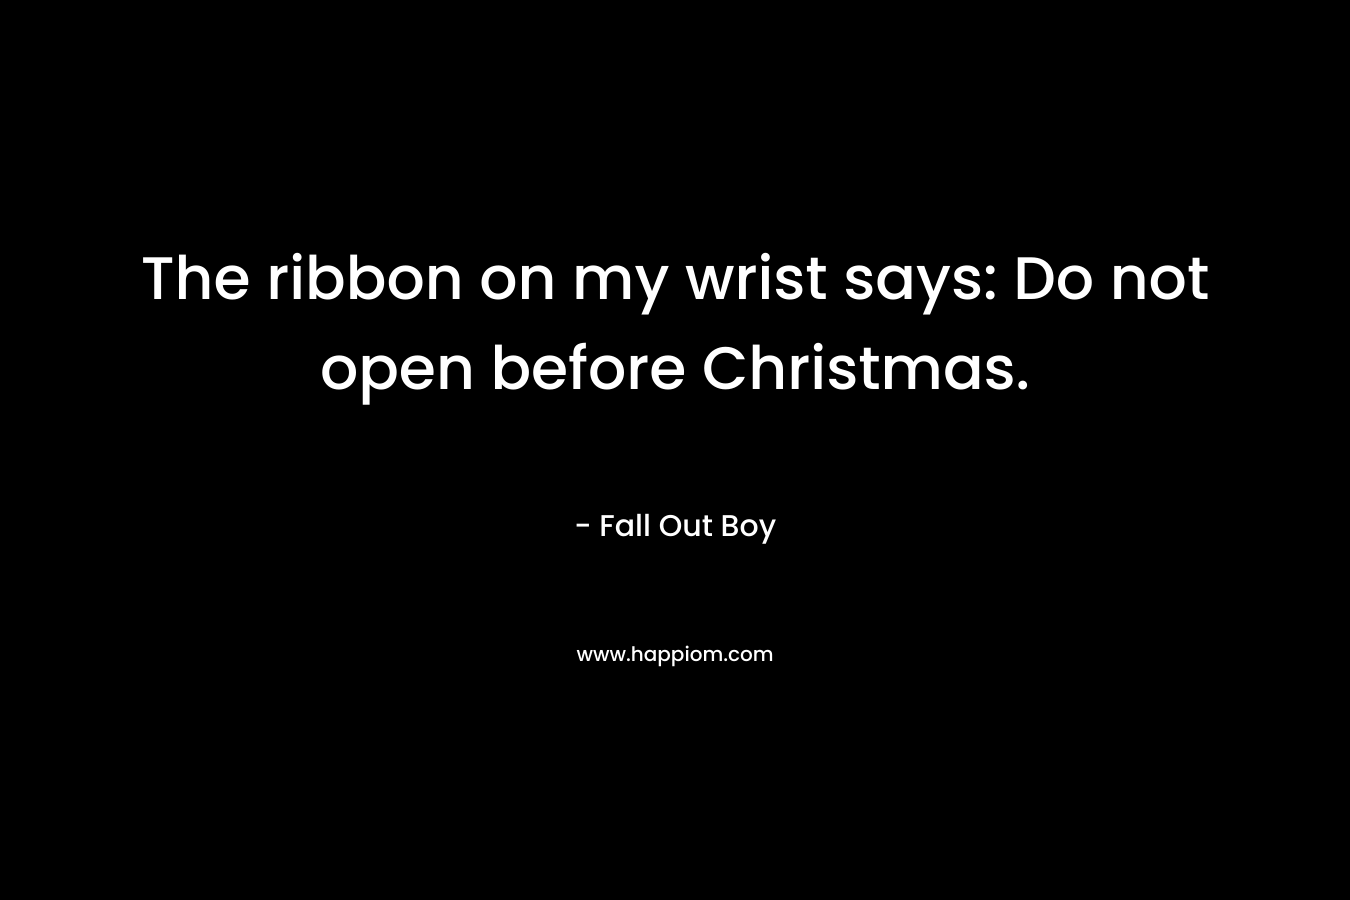 The ribbon on my wrist says: Do not open before Christmas.